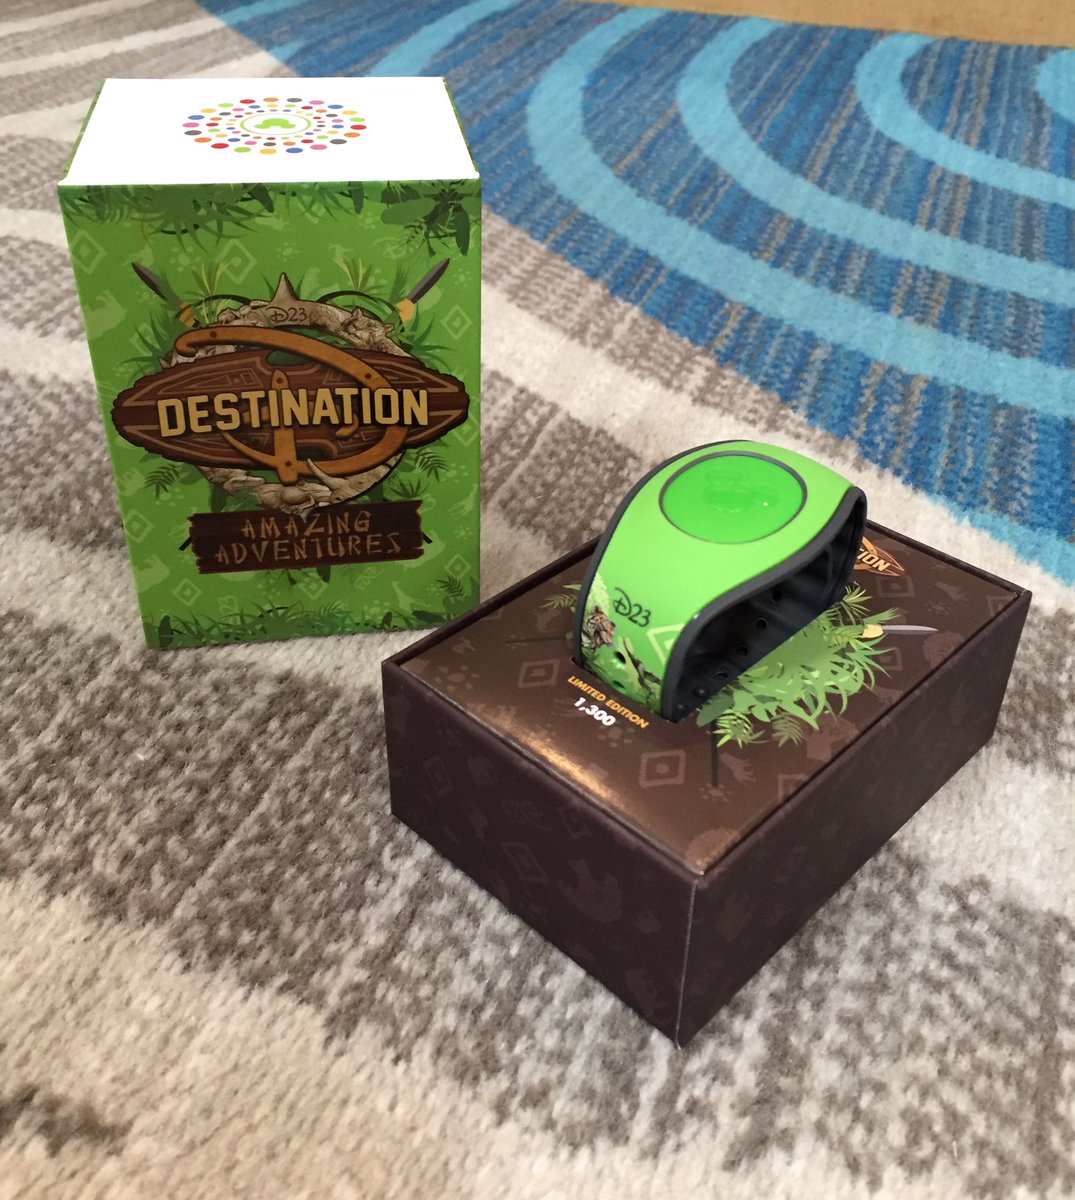 MagicBand 2.0 unveiled at D23 Destination D